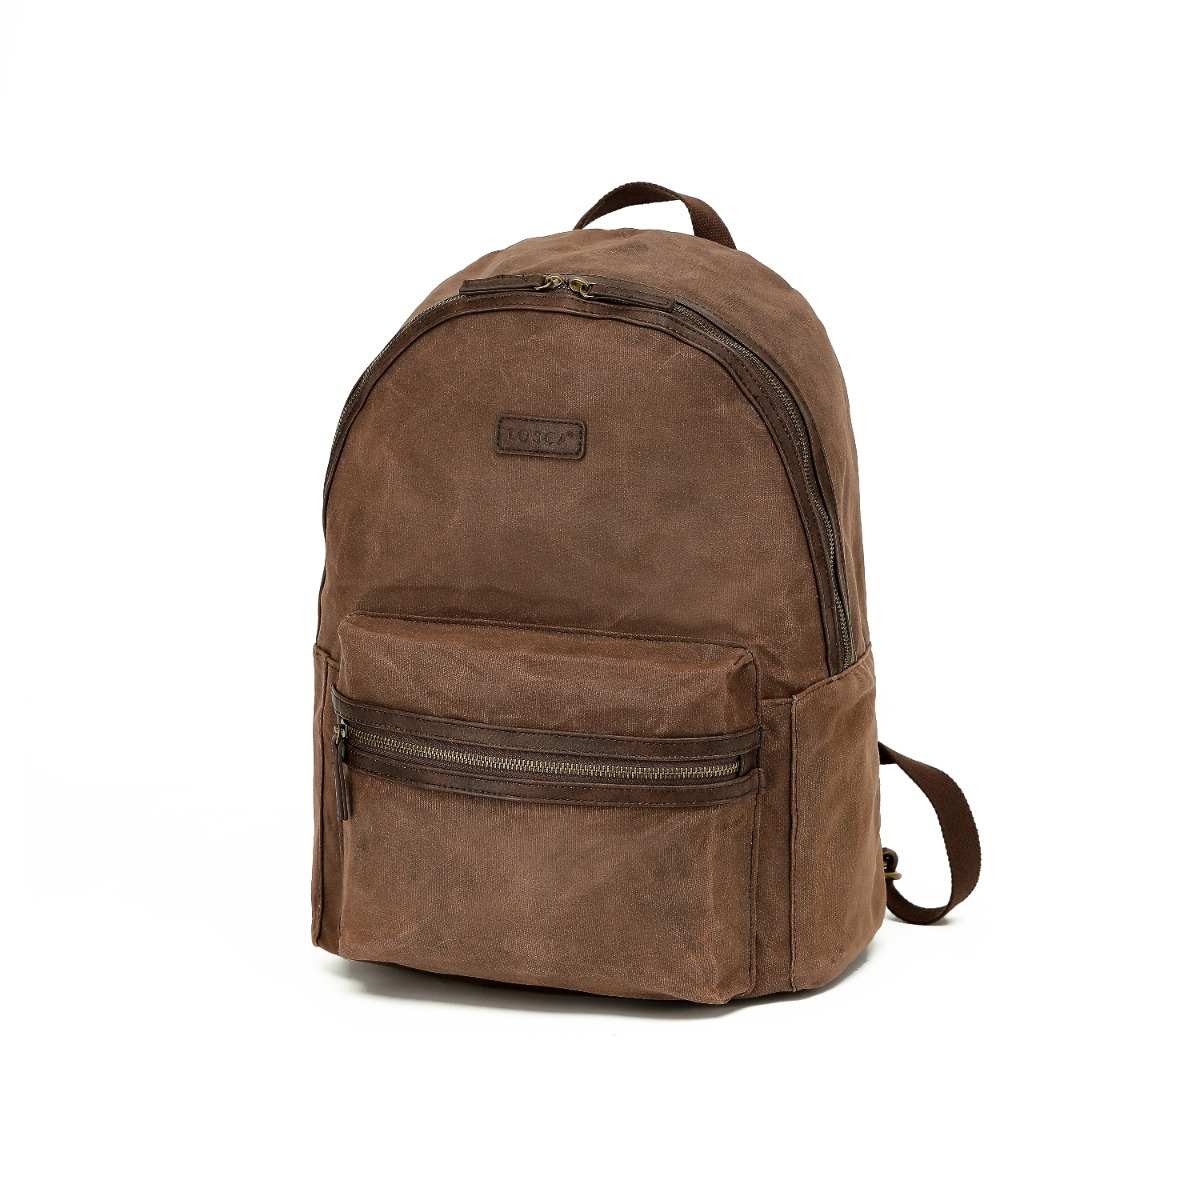 TASCO WAXED CANVAS DAY PACK